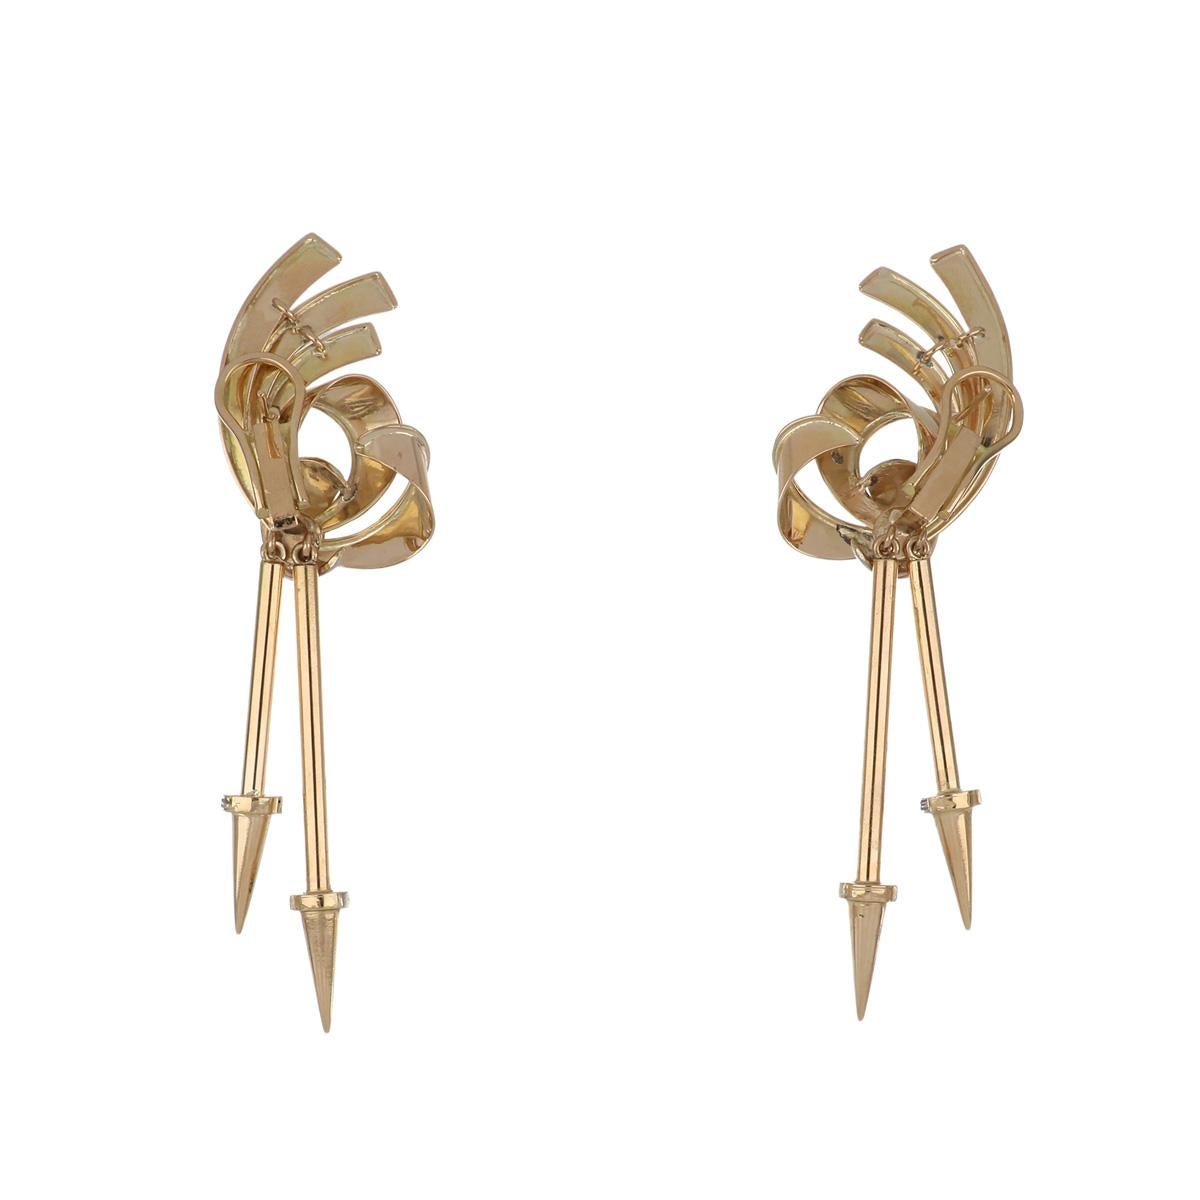 Retro 18K rose gold swirl motif earrings with double arrow drops and diamonds set in white gold. The earrings are set with 22 single-cut diamonds totaling 0.30 carats, J-K color, SI1-SI2 clarity. They are 3 1/2 inches in length. Circa 1940. 
